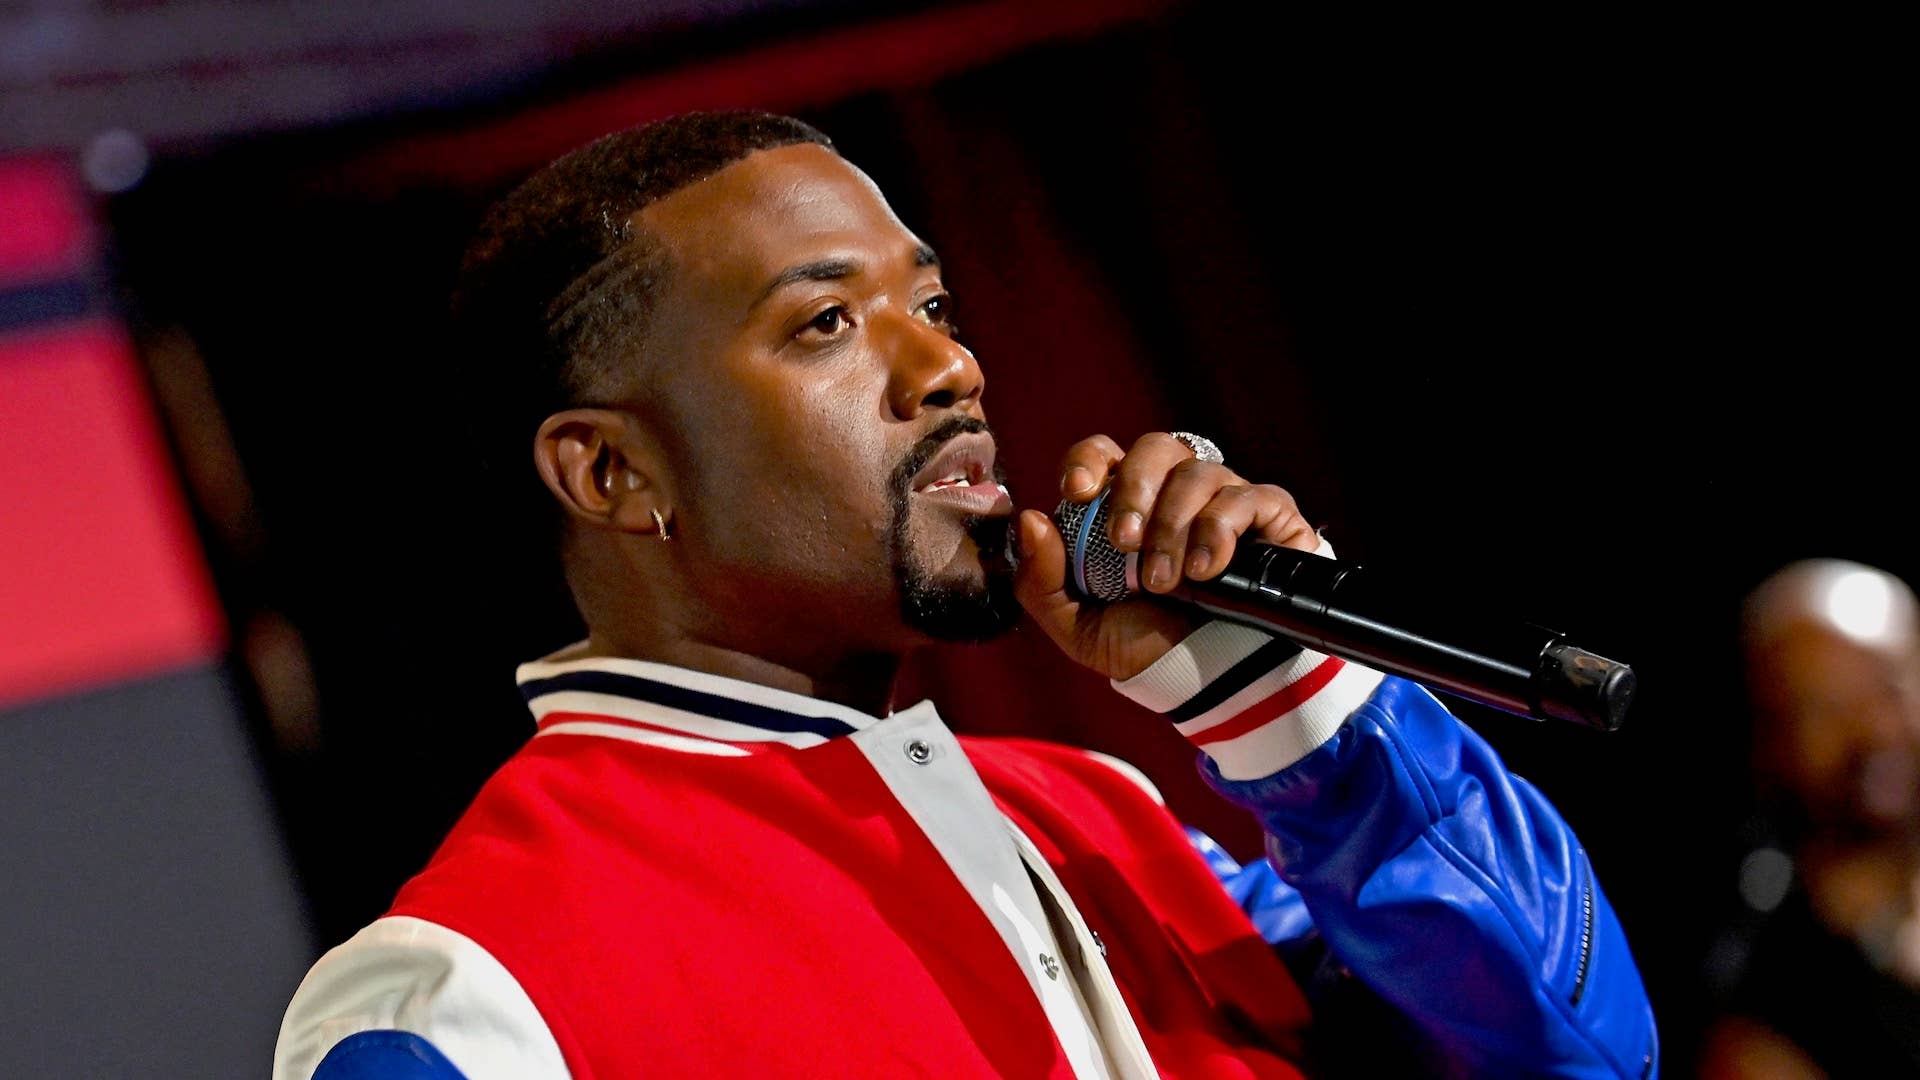 Ray J is seen onstage during the "College Hill Cast Meet & Greet"